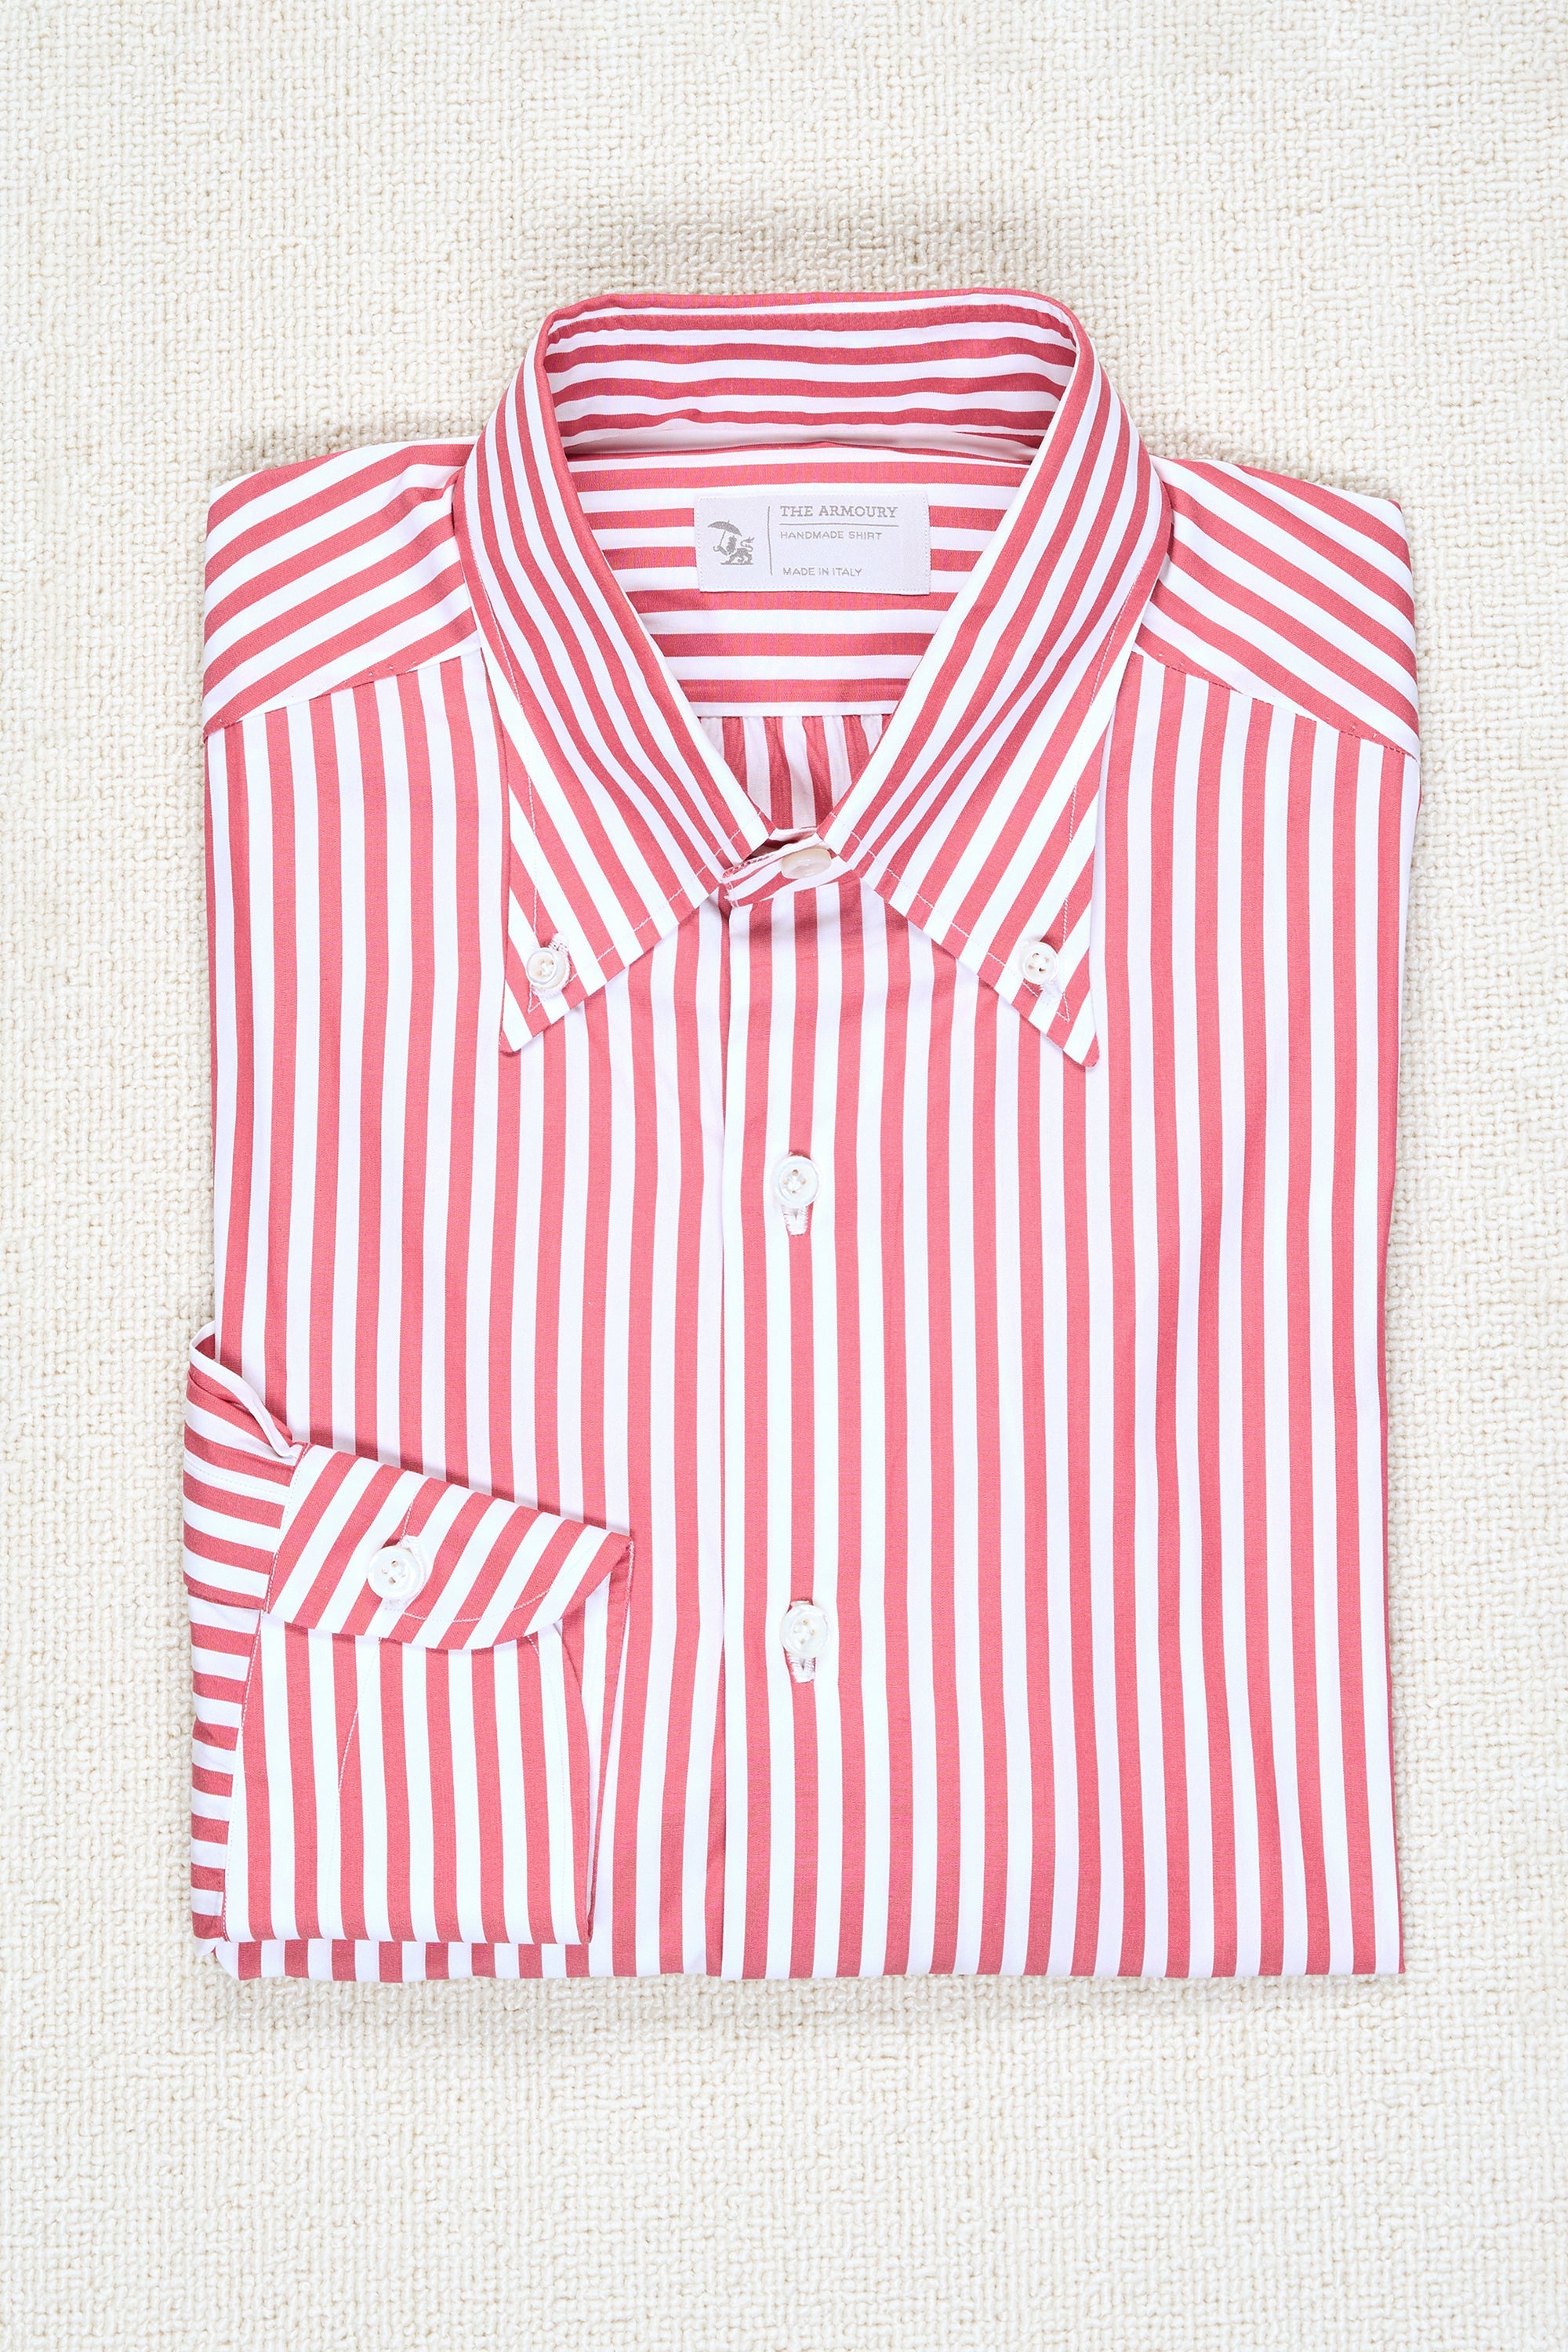 The Armoury Red Stripe Cotton Button-down Shirt MTM *sample*